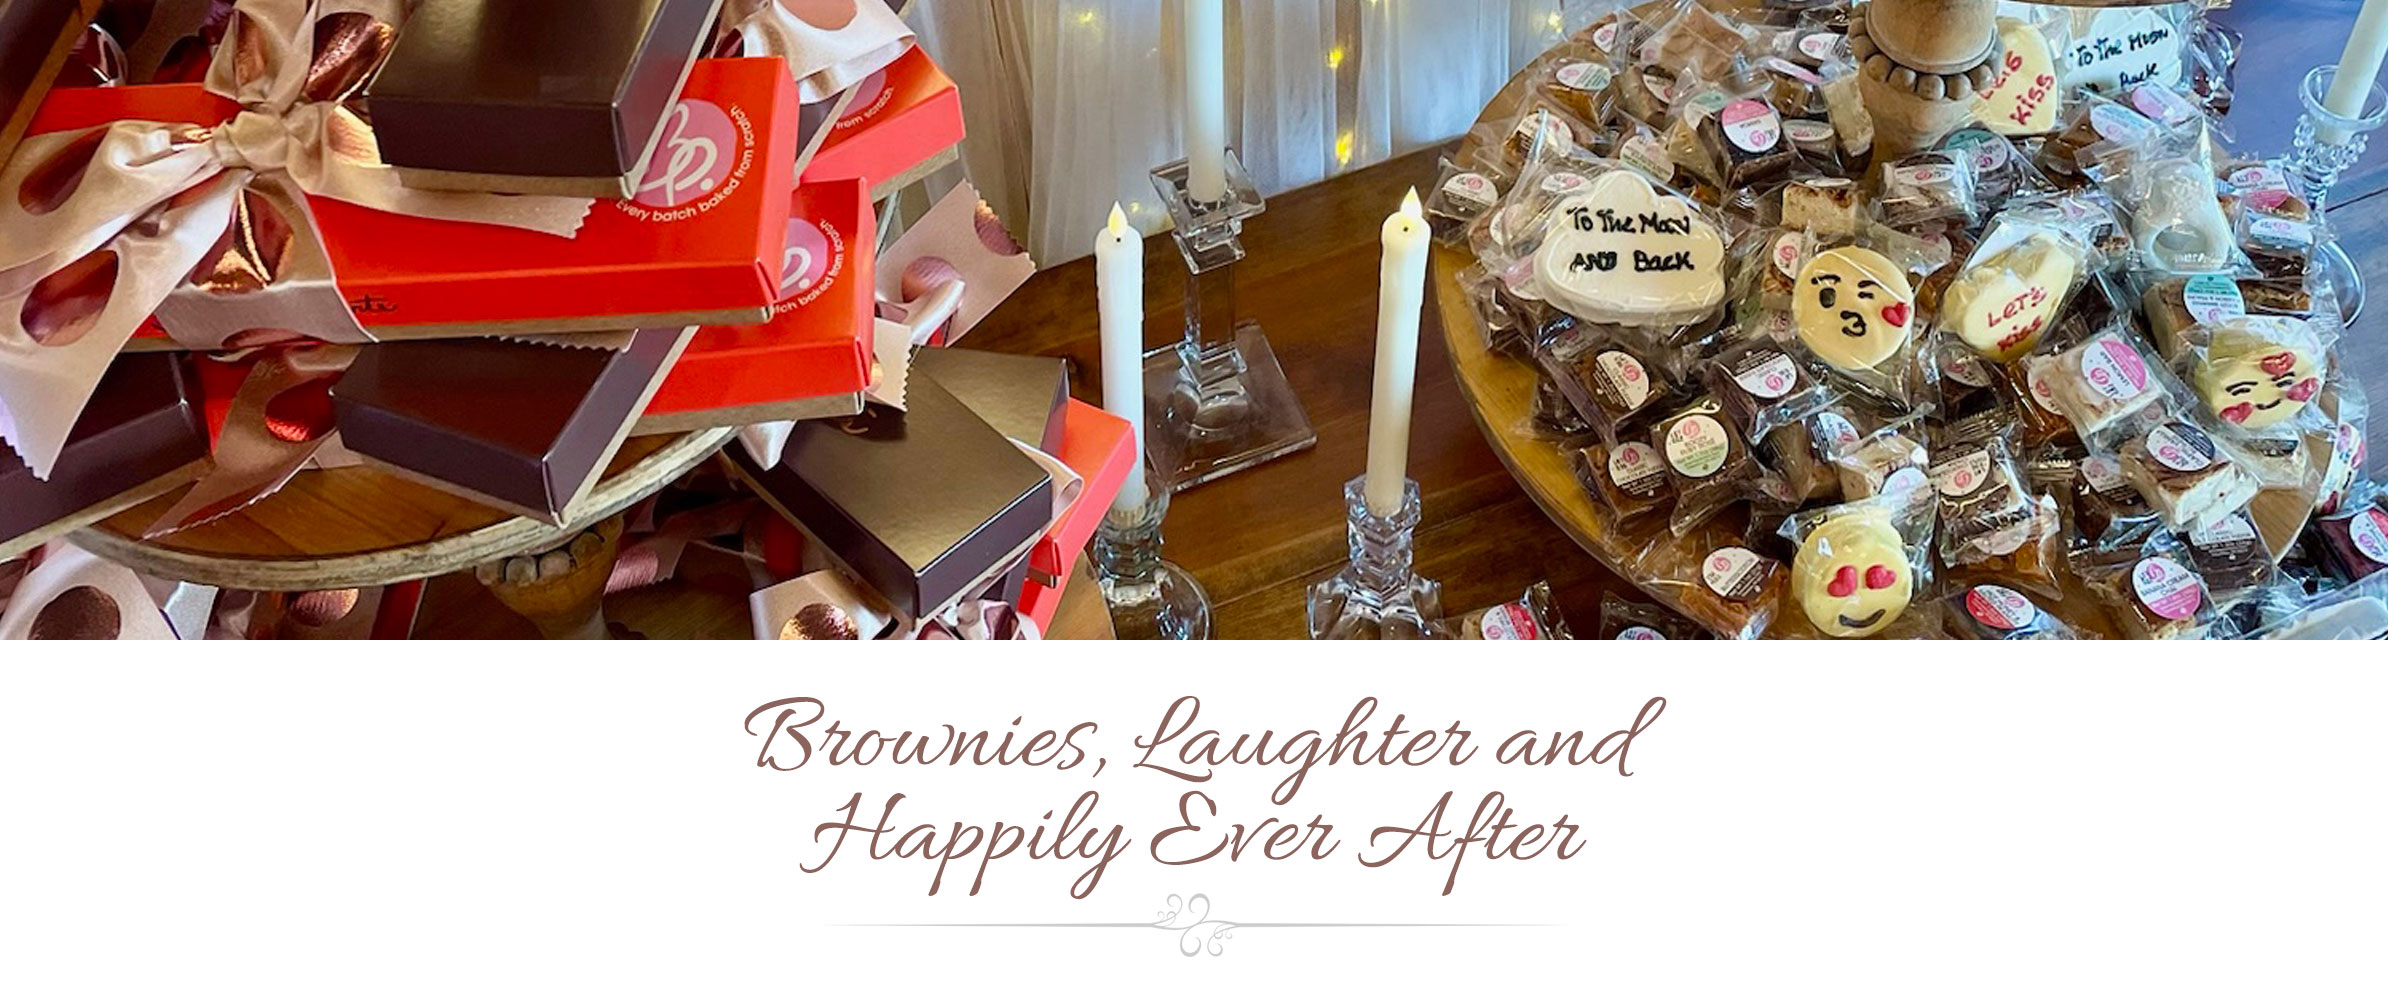 Wedding Favors from Brownie Points